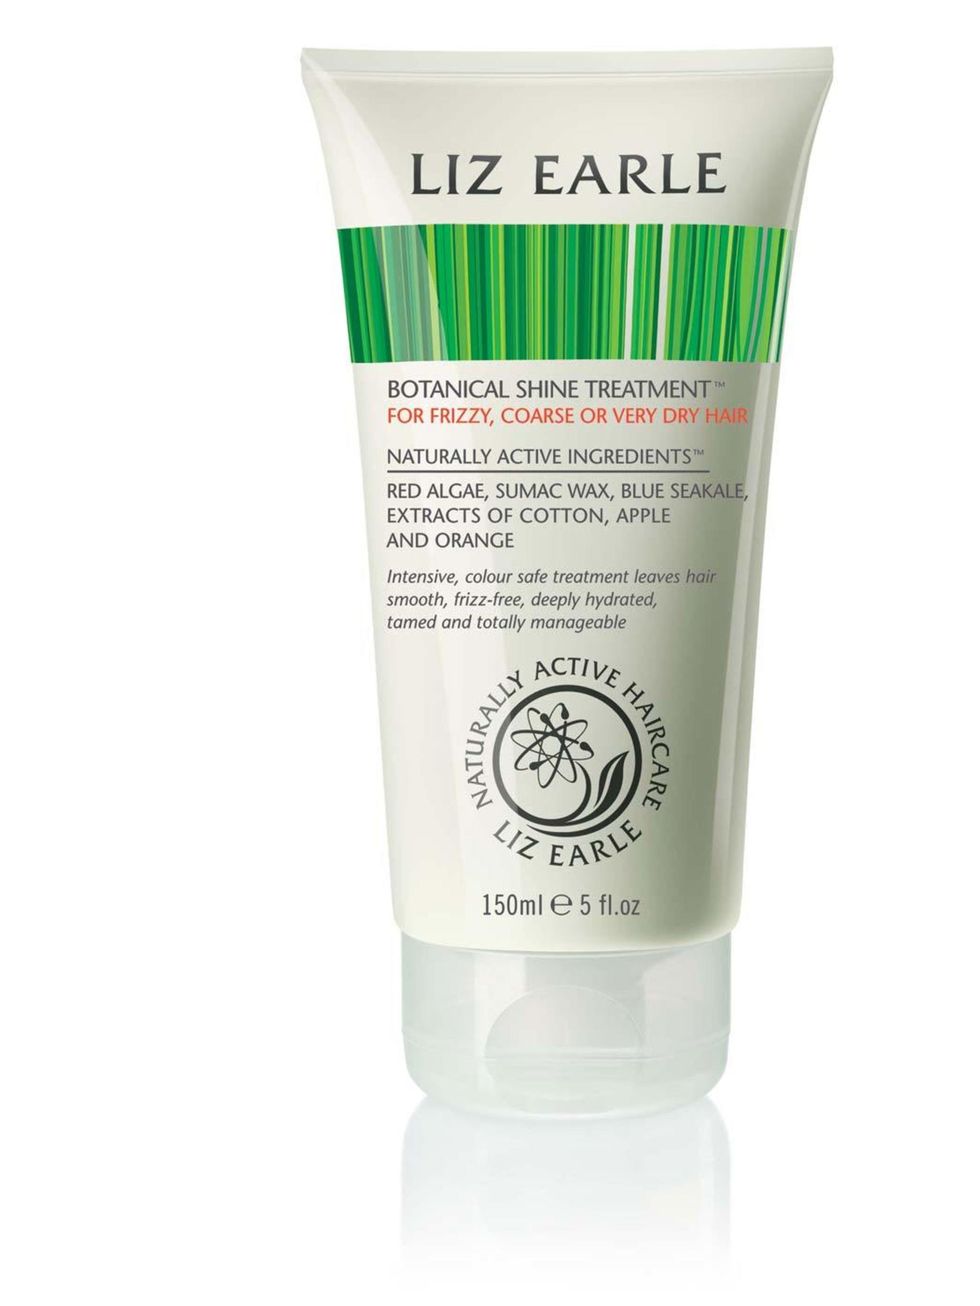 <p><a href="http://uk.lizearle.com/haircare/botanical-shine-treatment.html">Liz Earle Botanical Shine Treatment, £14.50</a></p><p>Great to treat your hair after a day or two of too much sunbathing. Your hair needs aftersun too, and this <a href="http://ww